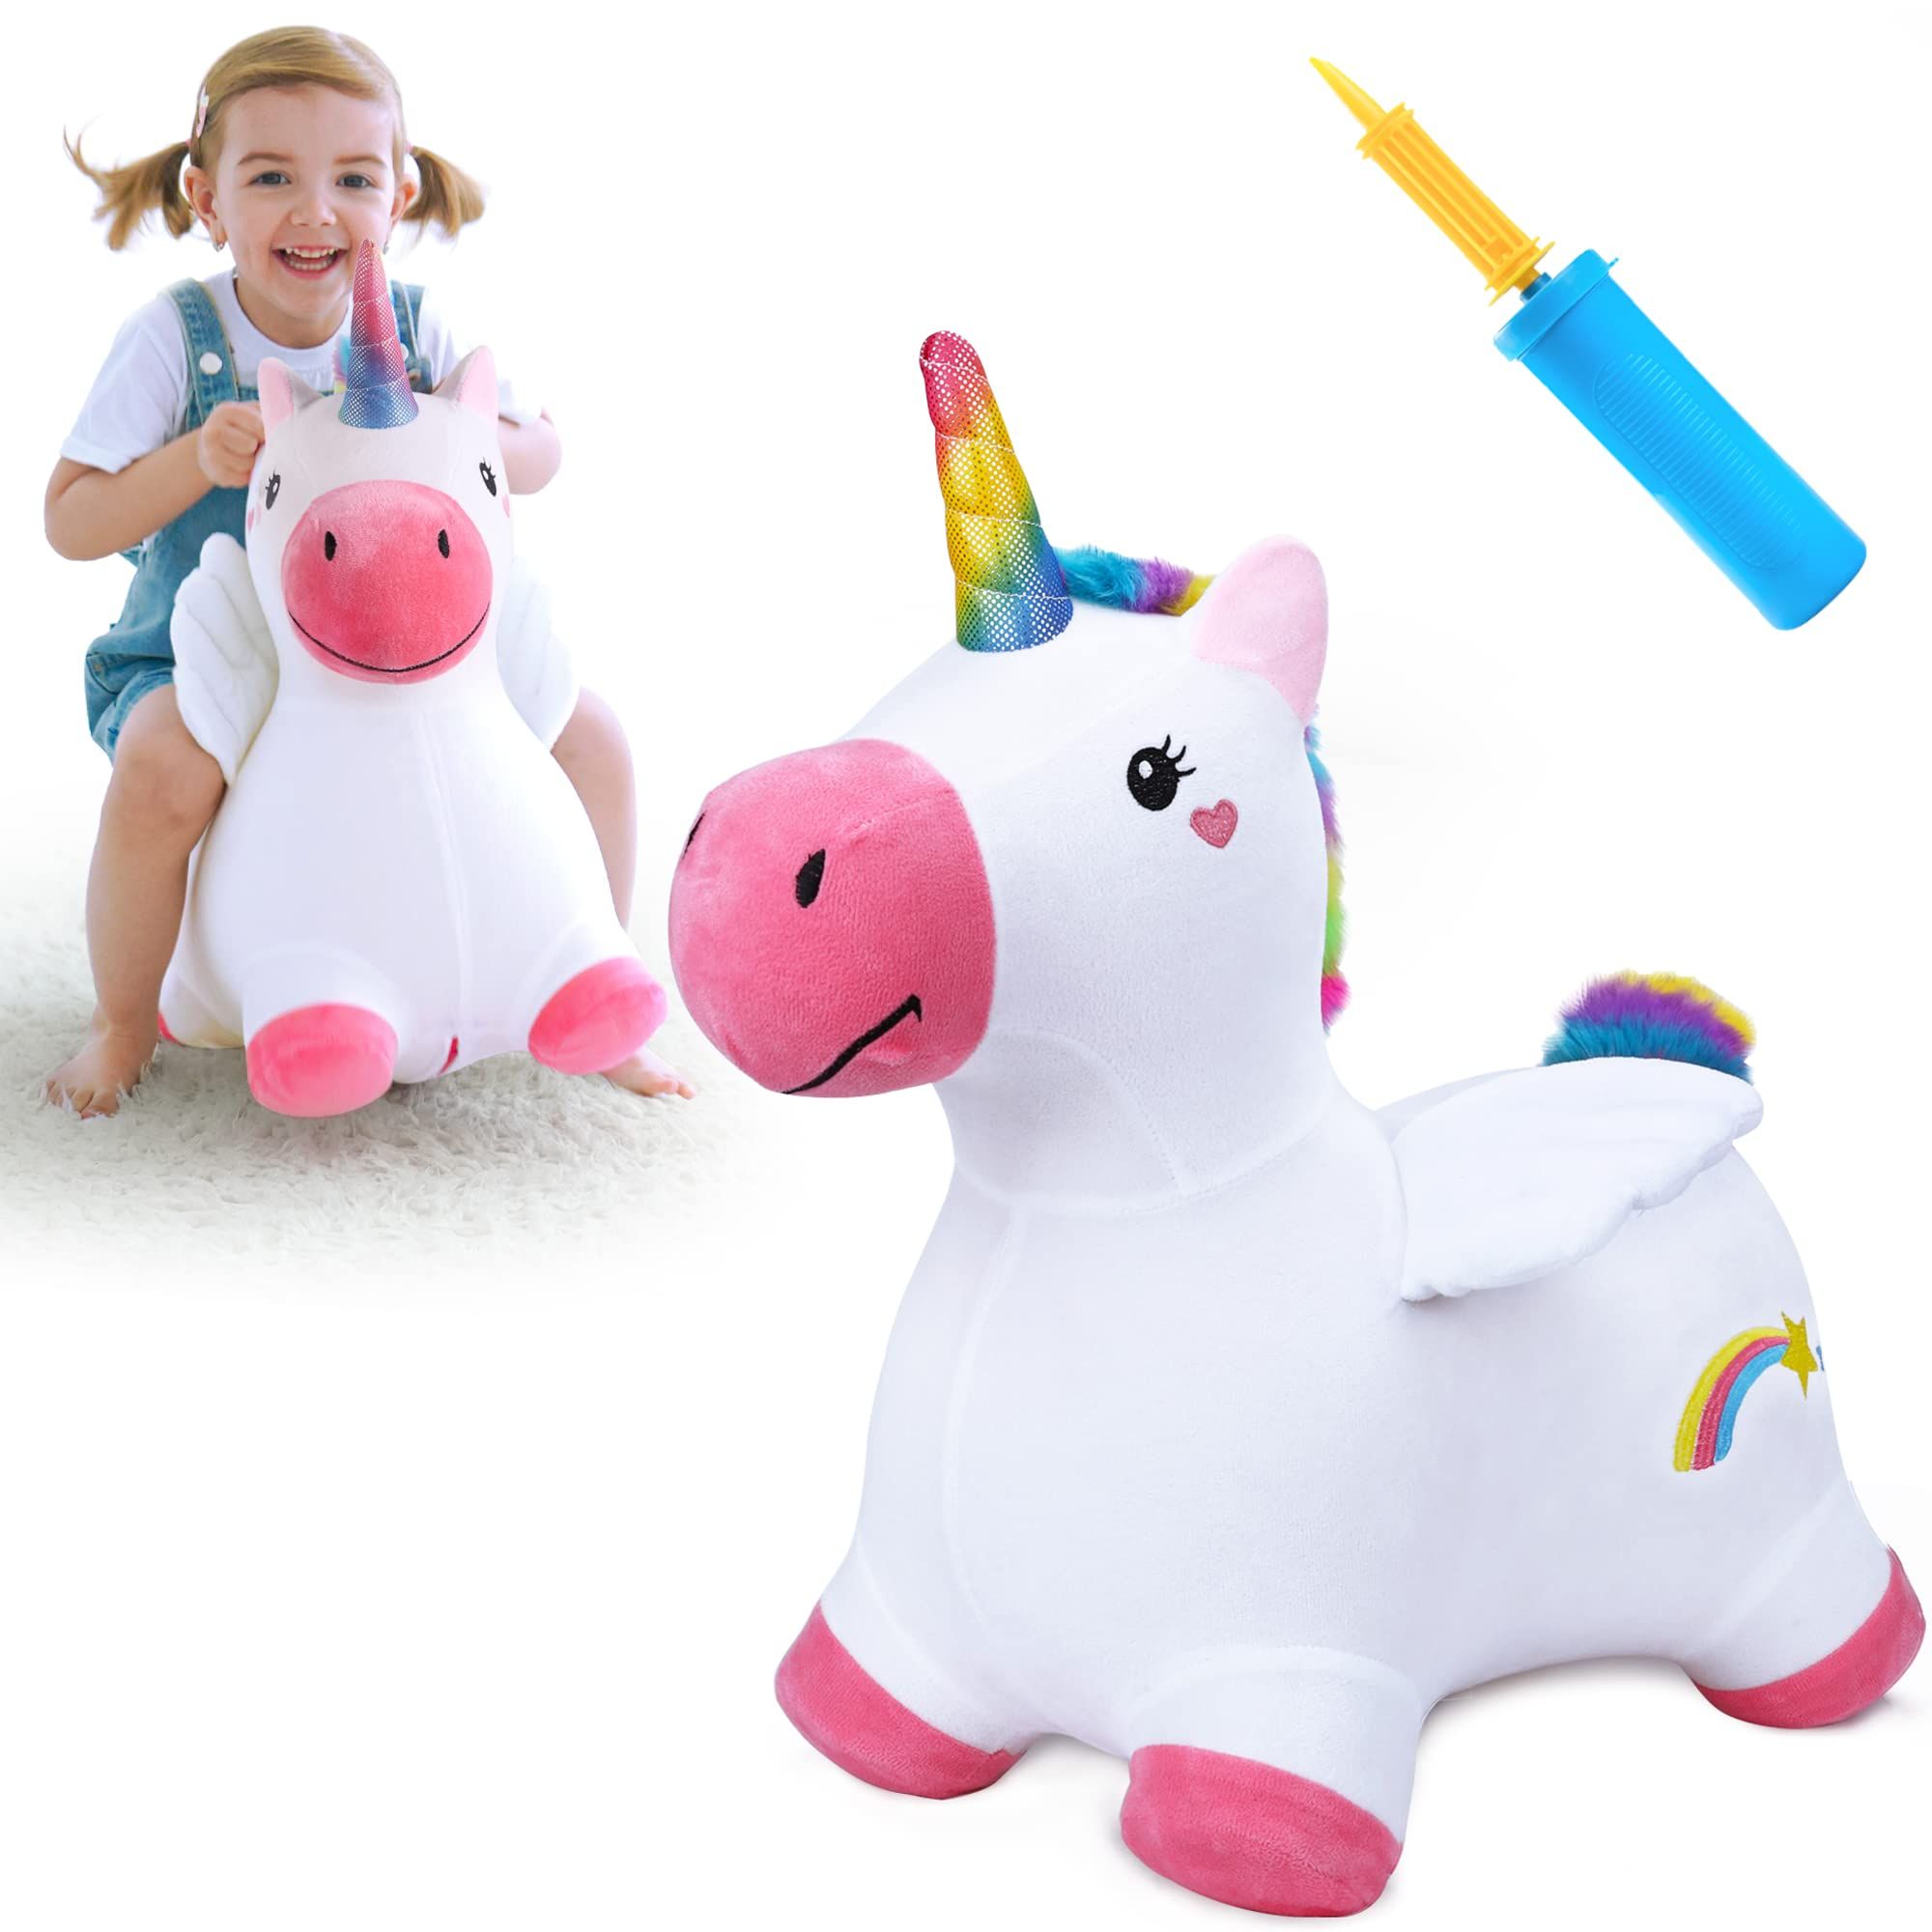 iPlay, iLearn Bouncy Pals Unicorn Bouncy Horse, Toddler Girl Bouncing Animal Hopper, Inflatable Plush Hopping Toy, Outdoor Indoor Ride on Bouncer, Baby First Birthday Gift 18 Months 2 3 4 Year Old Kid | Amazon (US)